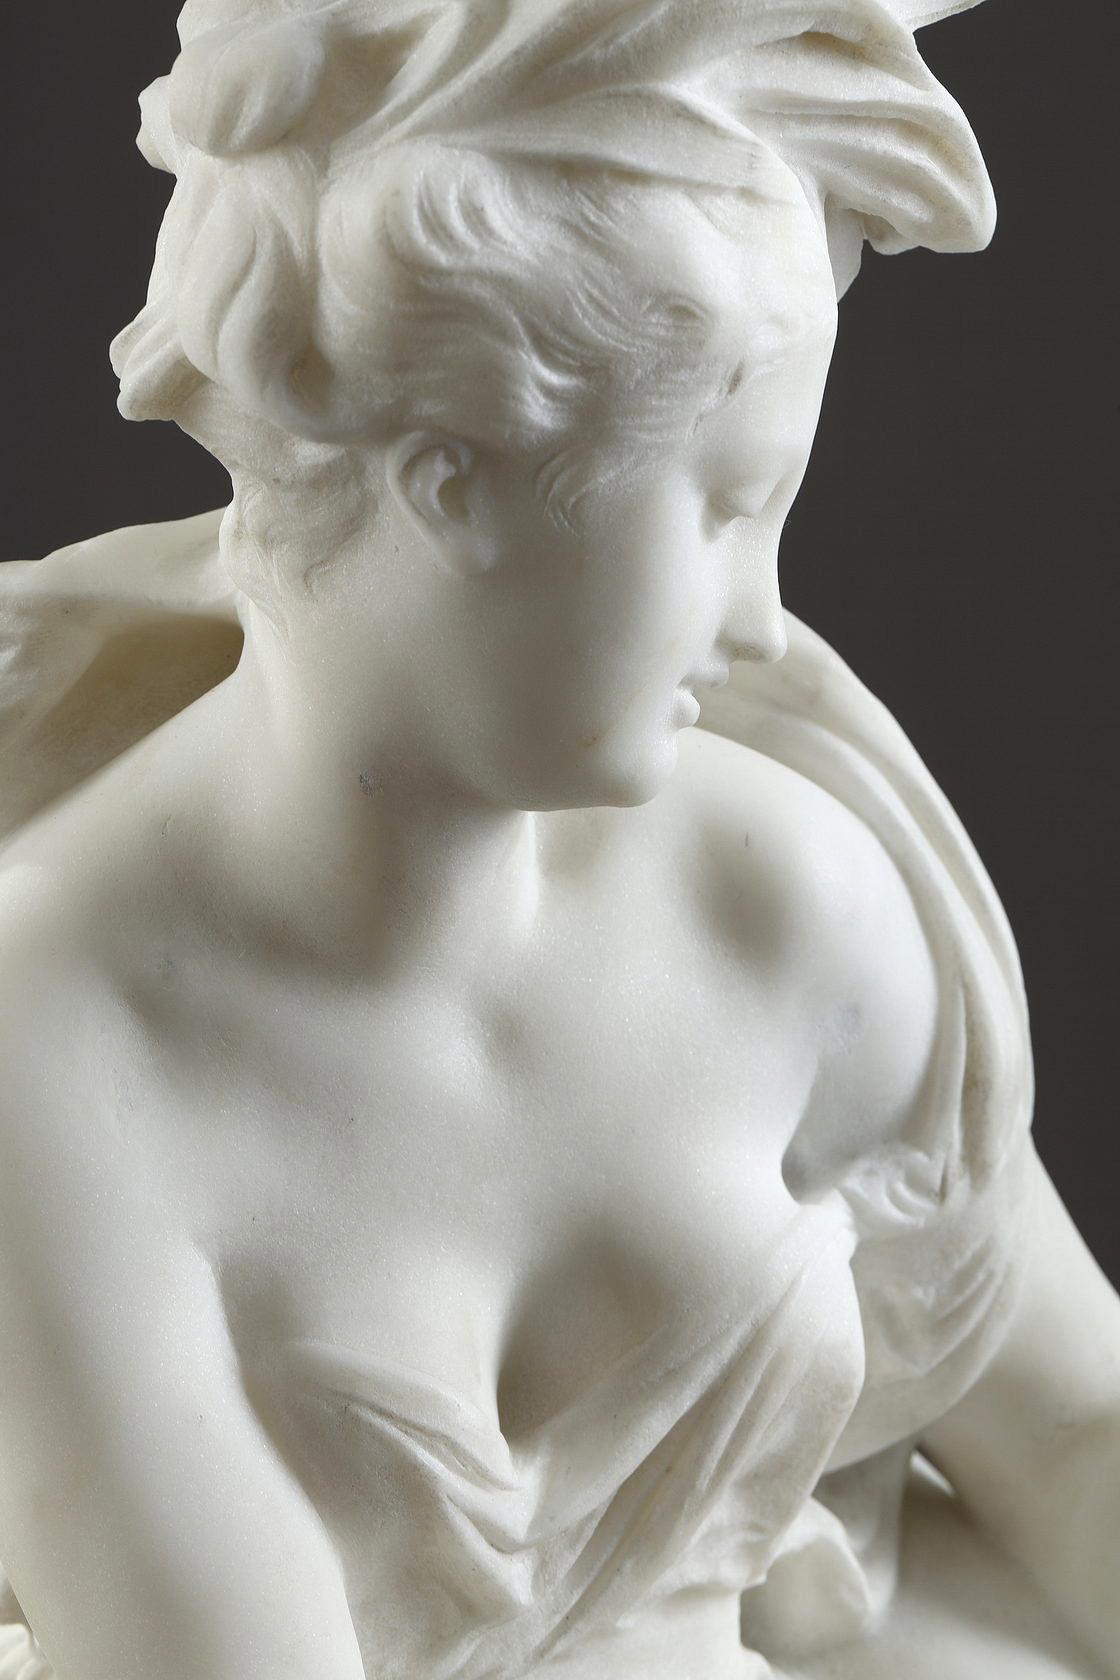 The Spring
by Albert-Ernest CARRIER-BELLEUSE (1824-1887)
 
Sculpture made in white Carrara marble
signed on the base 